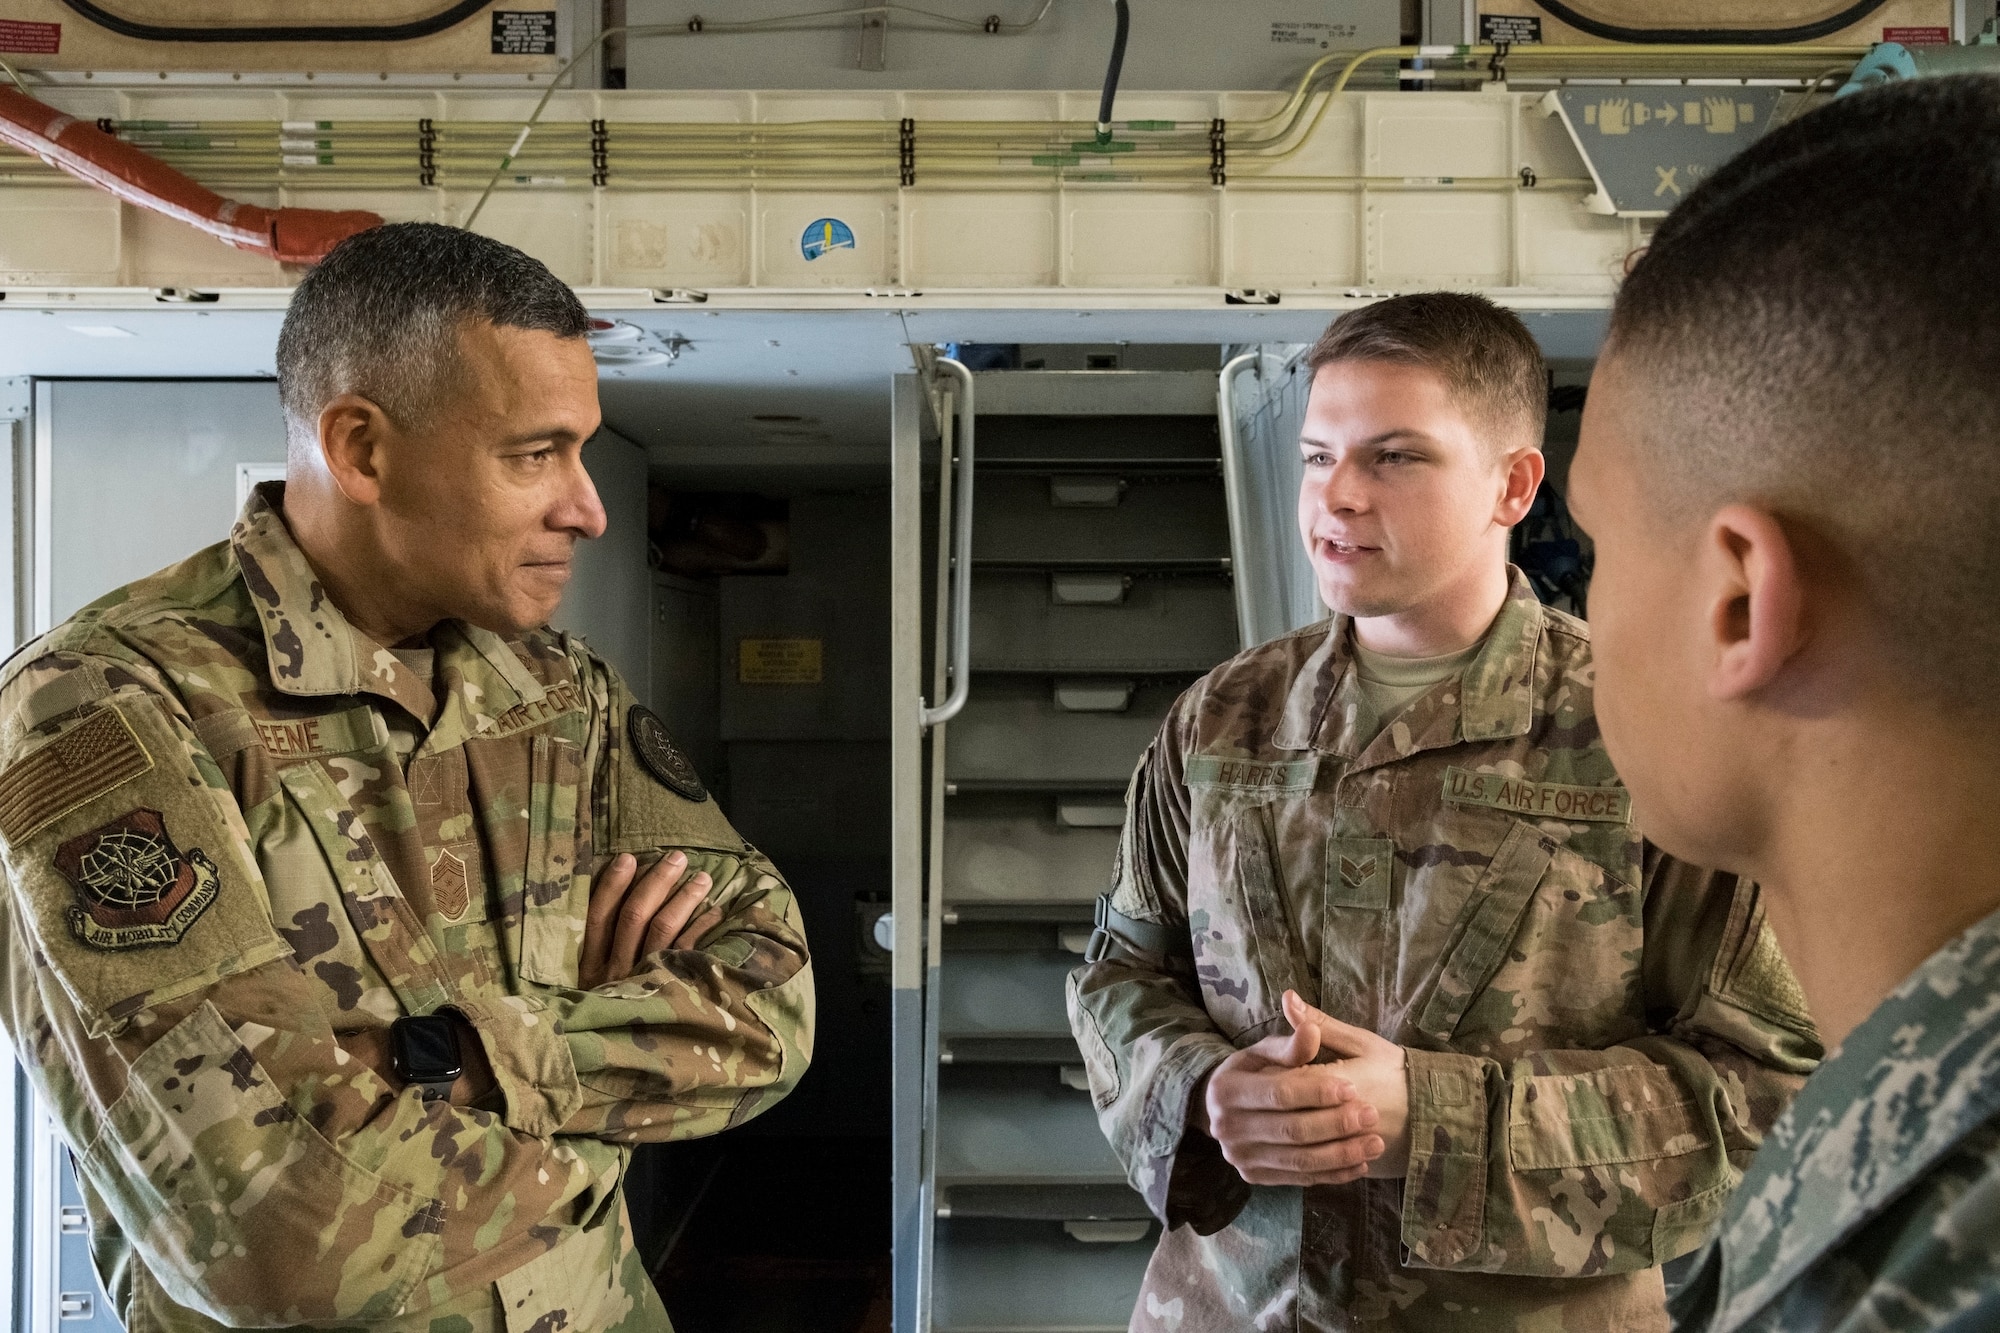 From left, U.S. Air Force Chief Master Sgt. Terrence Greene, command chief of Air Mobility Command, Scott Air Force Base, Ill., speaks with Senior Airman Victor Harris, C-17 Globemaster III aircraft dedicated crew chief (DCC), and Airman 1st Class Jason Thompson, C-17 assistant DCC, both assigned to the 736th Aircraft Maintenance Squadron Feb. 7, 2019, at Dover Air Force Base, Del. Harris and Thompson briefed Greene on the C-17 DCC program. (U.S. Air Force photo by Roland Balik)